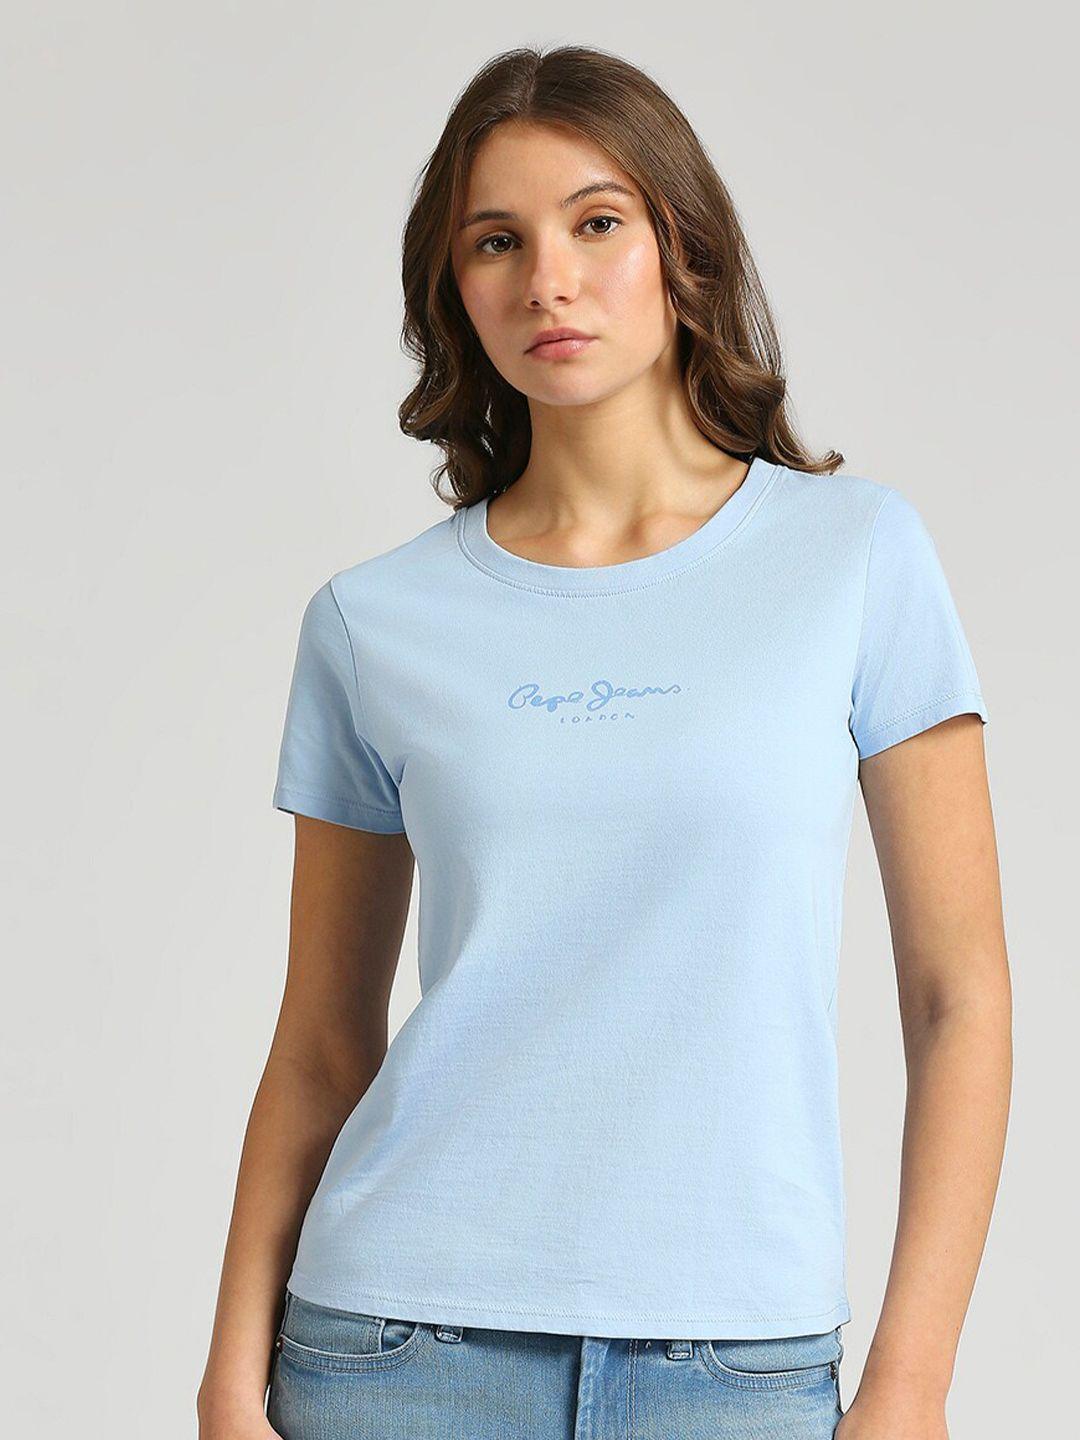 pepe jeans brand logo printed round neck pure cotton t-shirt